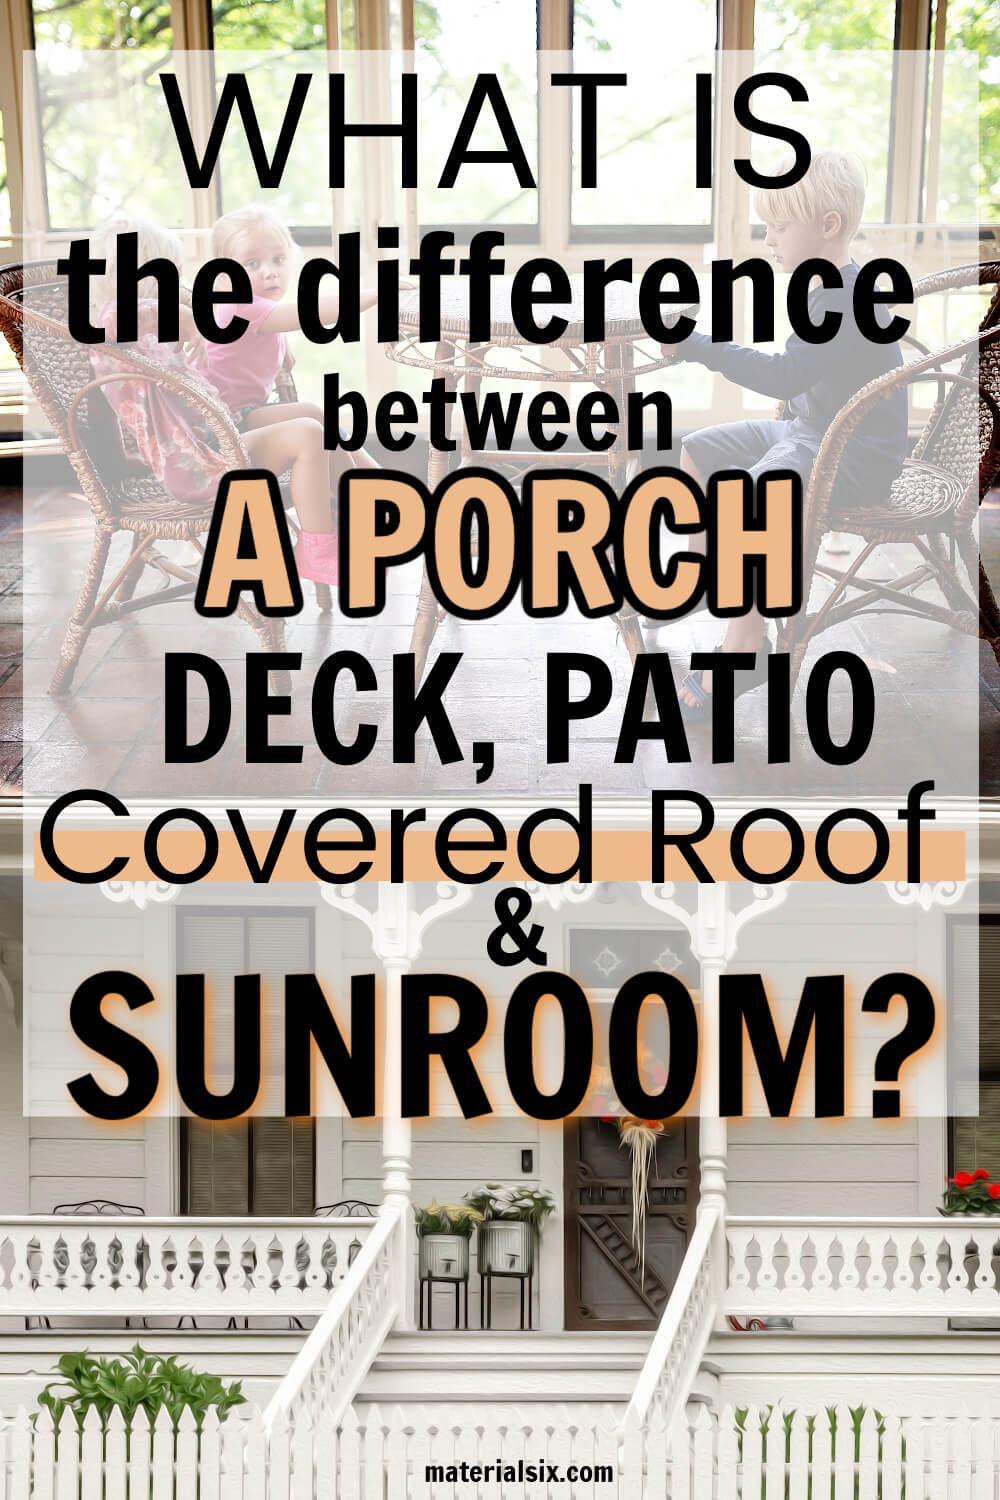 Difference Between a Porch, Deck, Patio, Covered Roof, and Sunroom